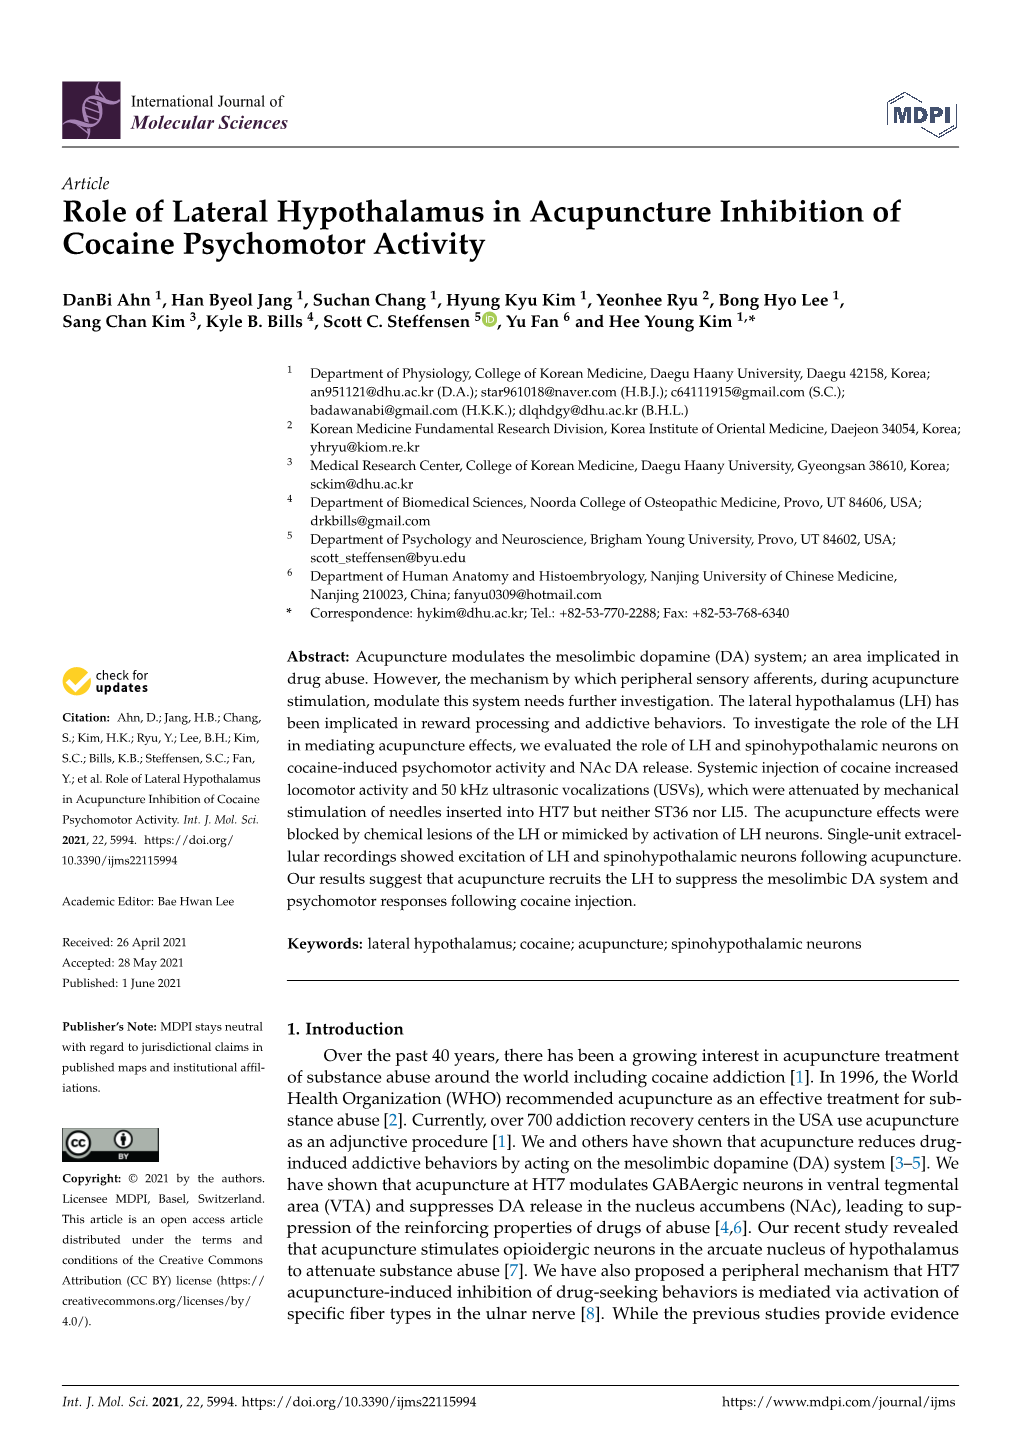 Role of Lateral Hypothalamus in Acupuncture Inhibition of Cocaine Psychomotor Activity